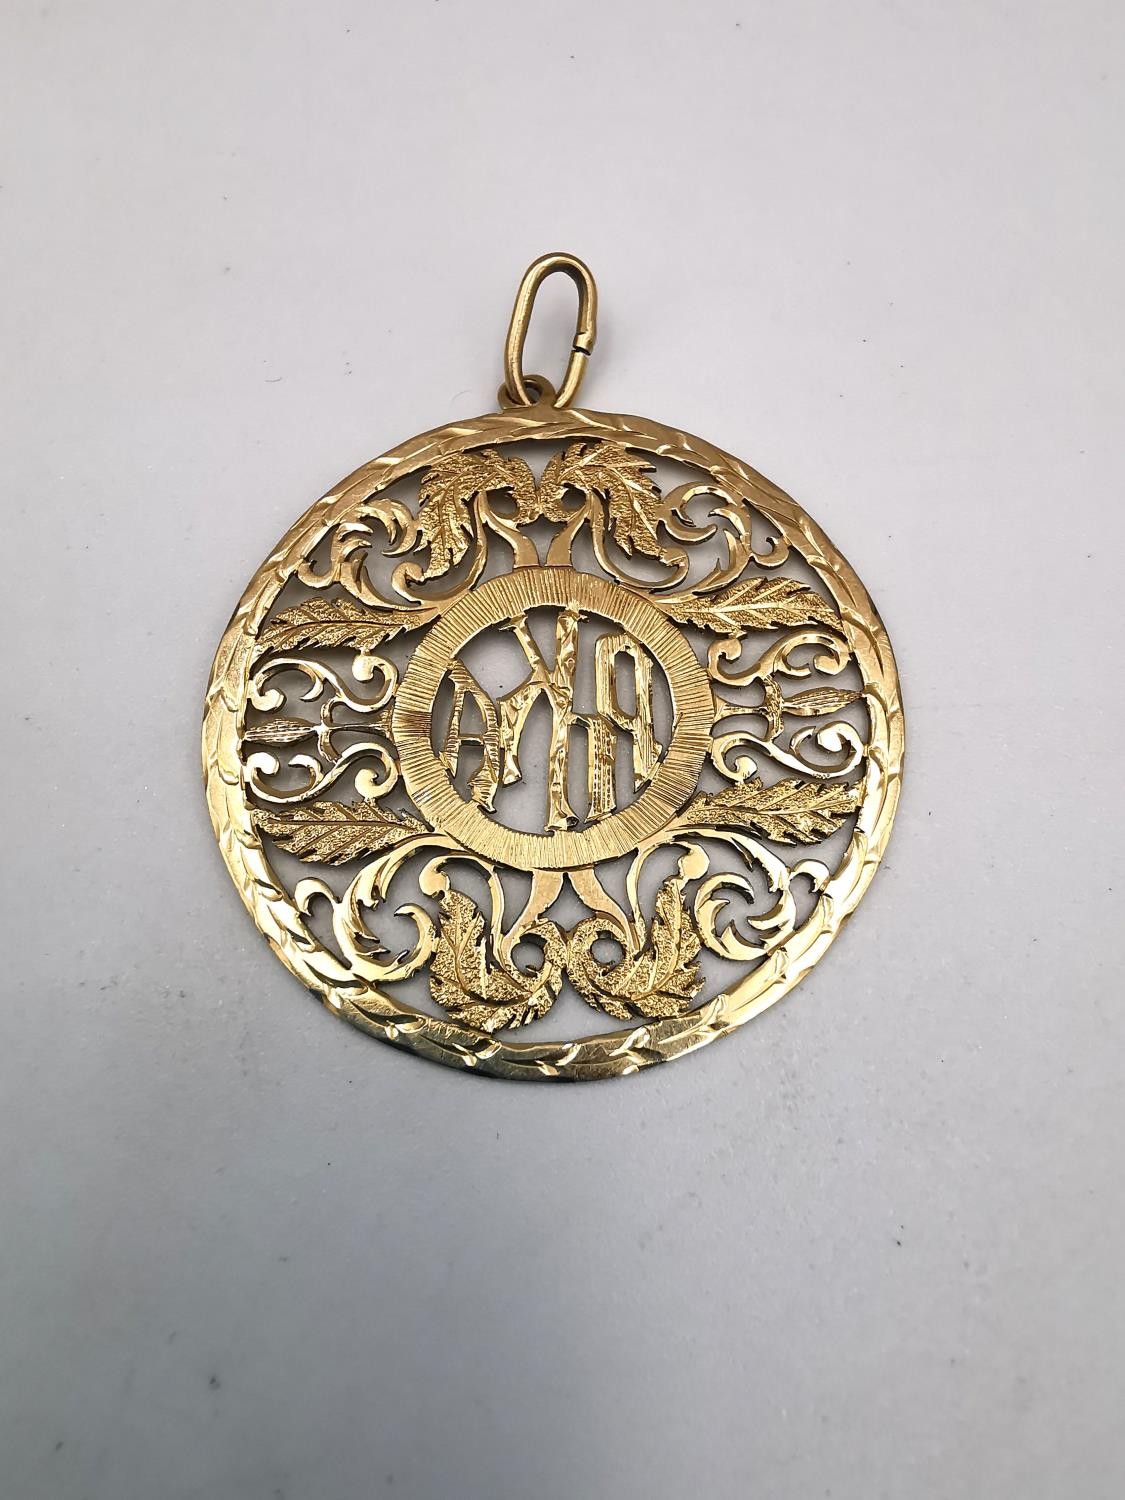 A gold plated pierced mongram pendant with acanthus leaf detailing. Diameter 4cm. Weight 5.06g